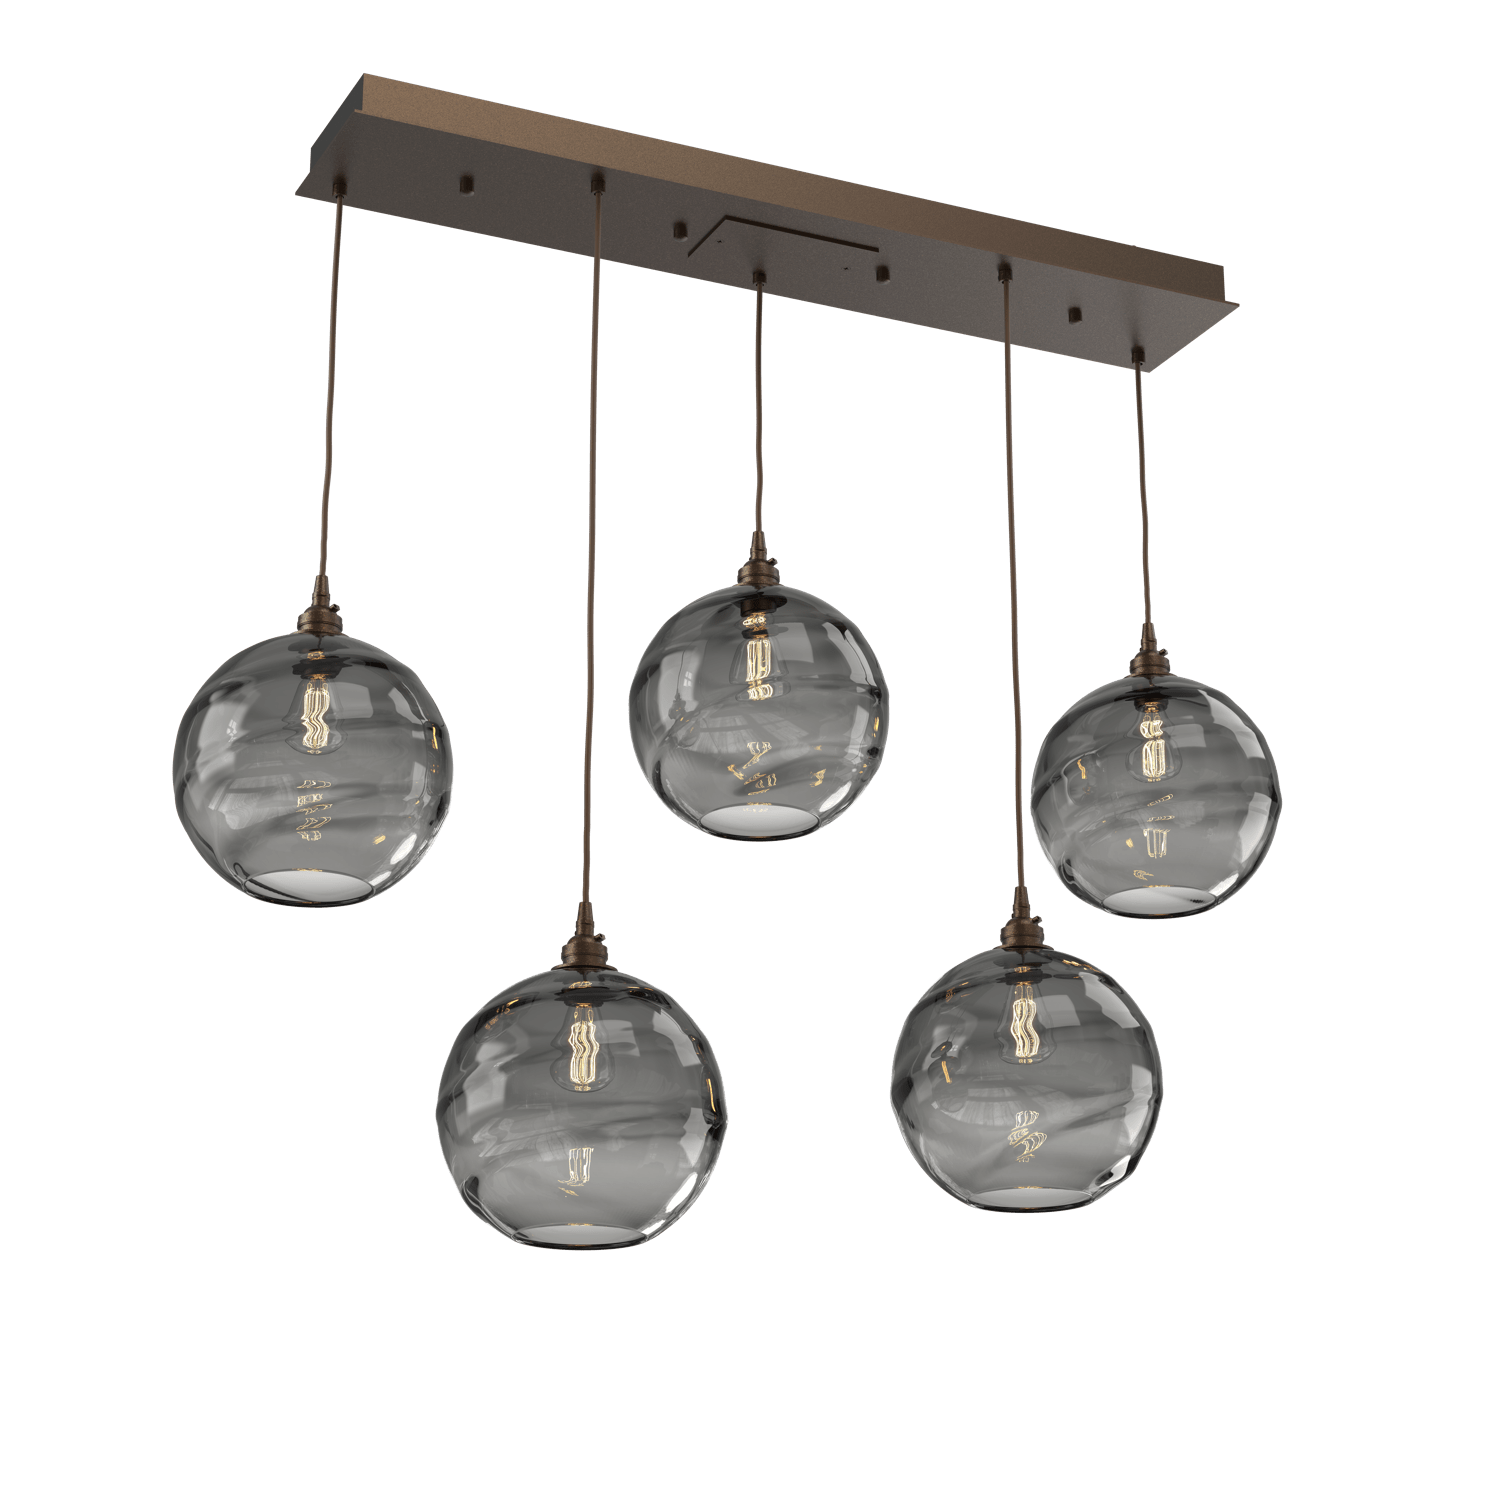 PLB0047-05-FB-OS-Hammerton-Studio-Optic-Blown-Glass-Terra-5-light-linear-pendant-chandelier-with-flat-bronze-finish-and-optic-smoke-blown-glass-shades-and-incandescent-lamping